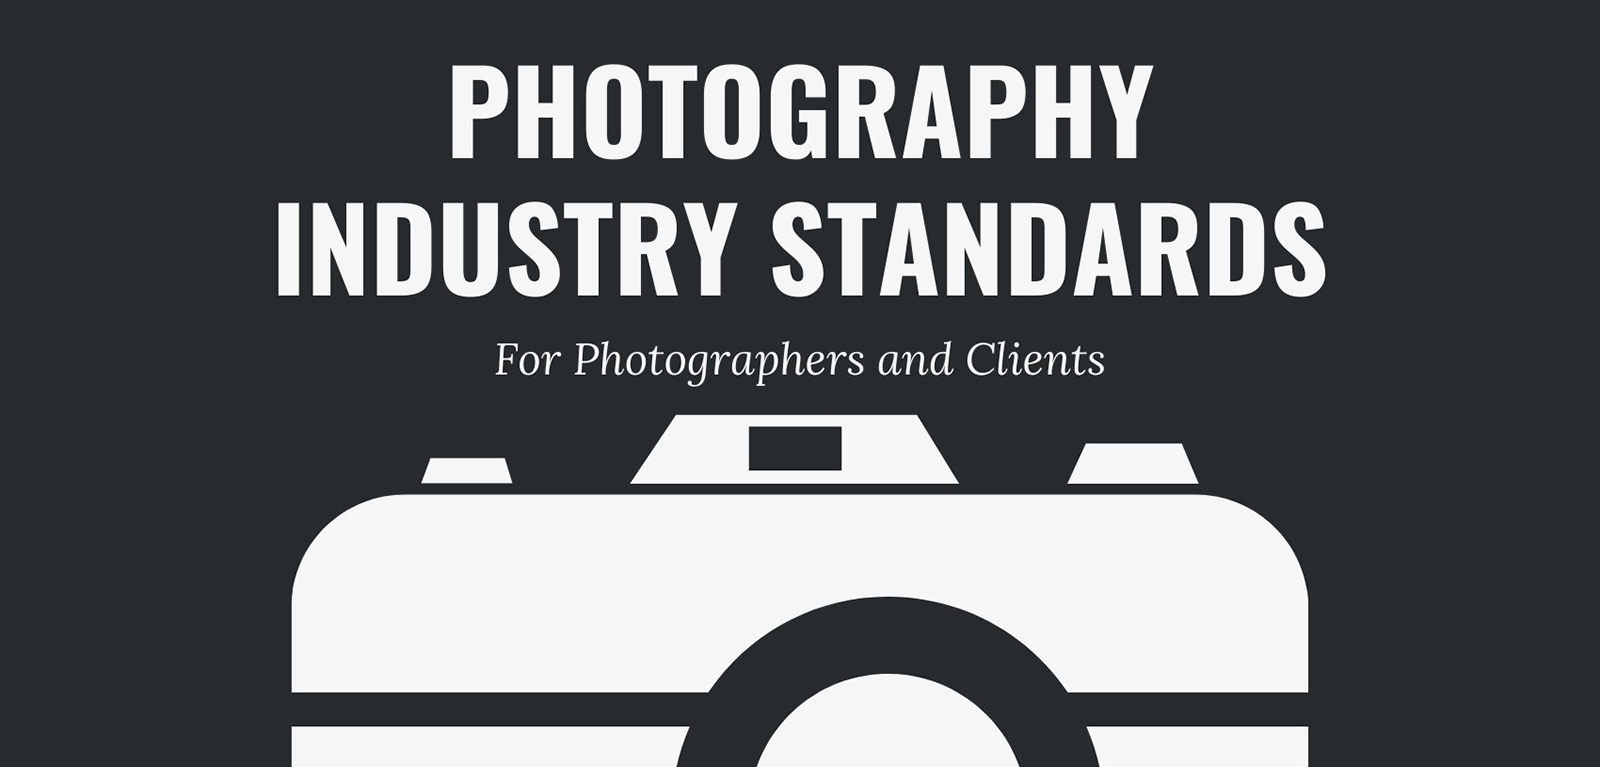 Guide to Industry Standards for Professional Photographers and Their Clients